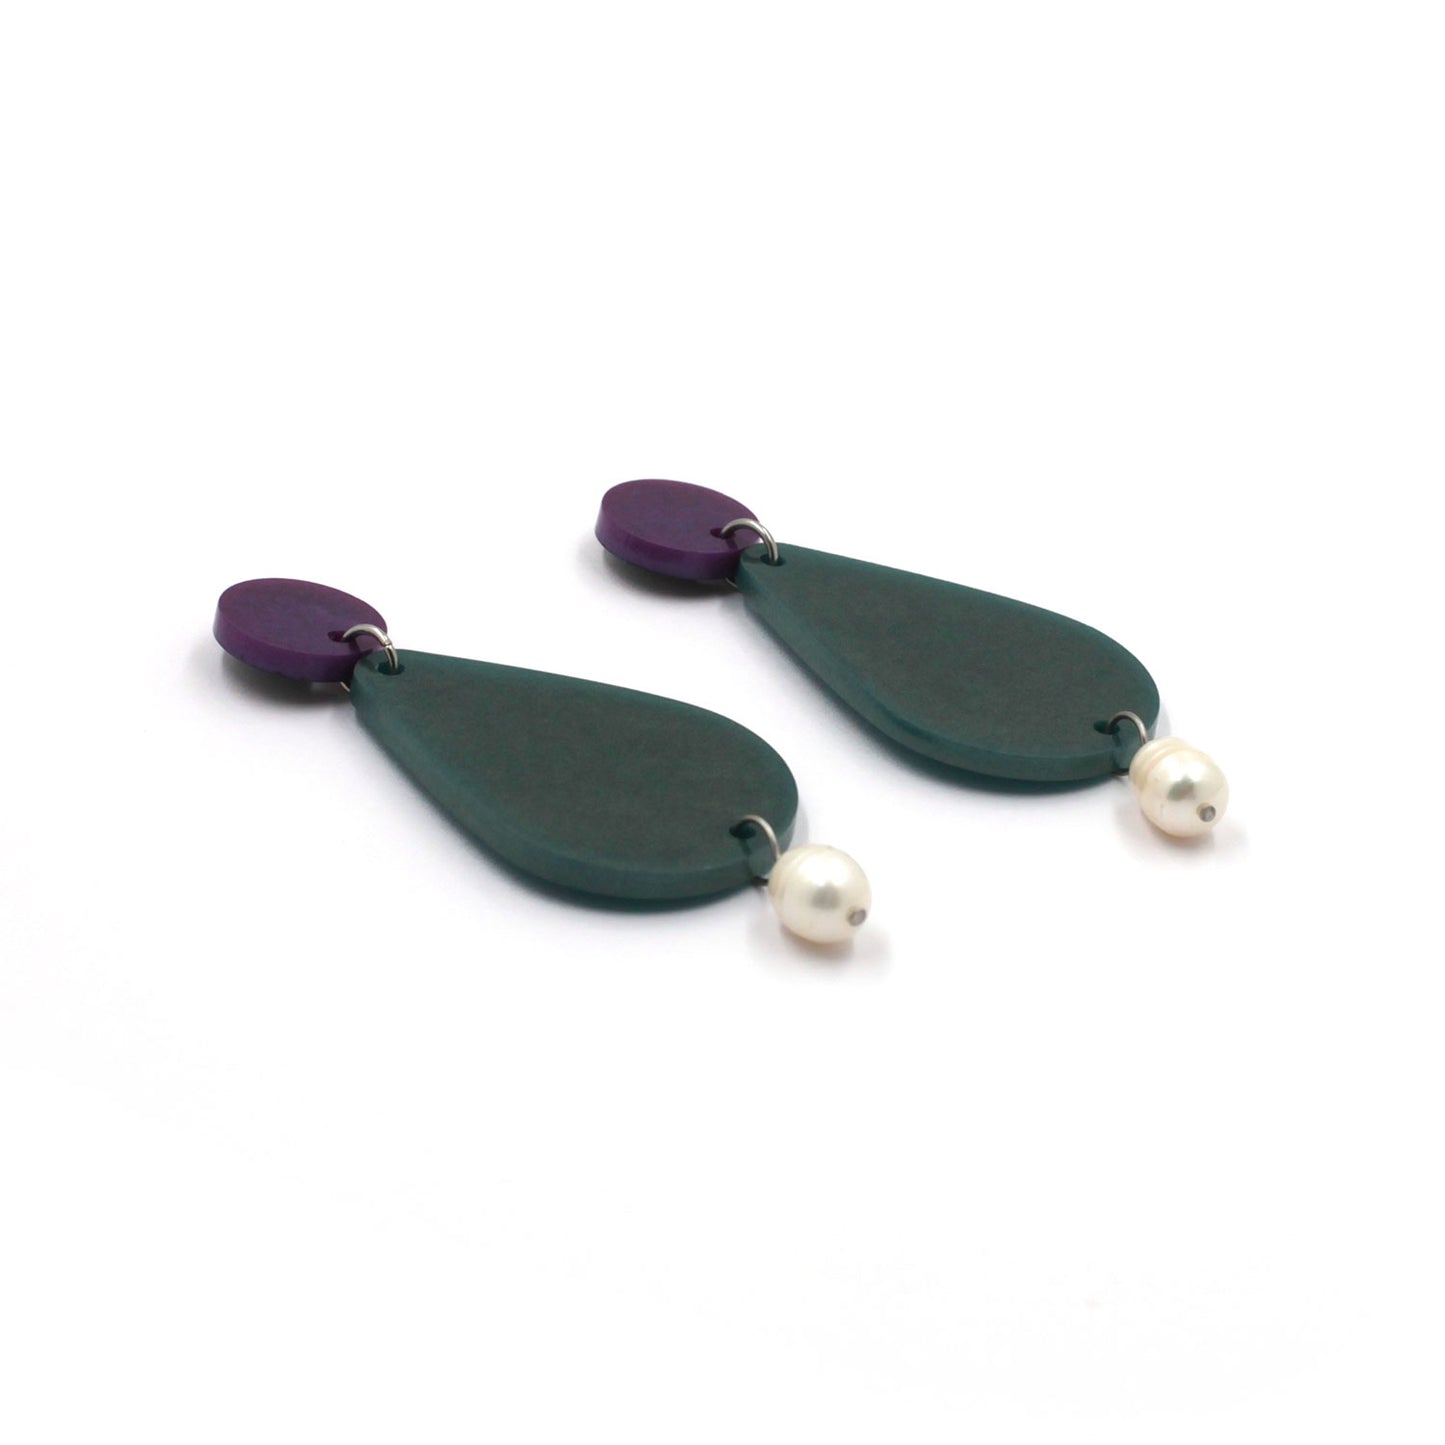 picture of earrings on a white background. the earrings are composed by a purple dot at the top, then a bigger green pear shape and a freshwater pearls at the bottom hanging.